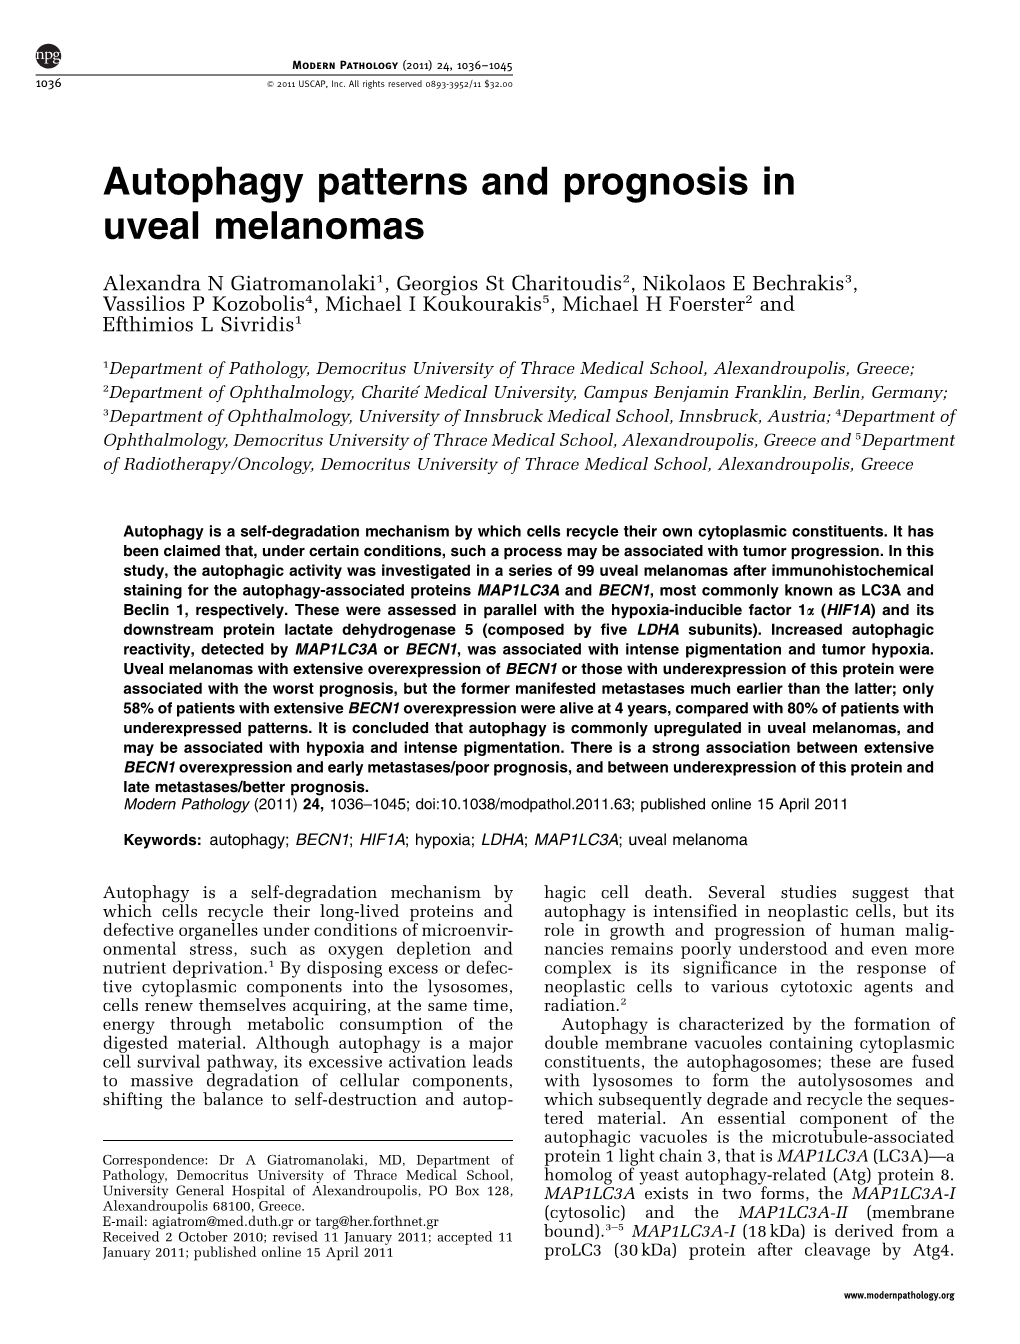 Autophagy Patterns and Prognosis in Uveal Melanomas